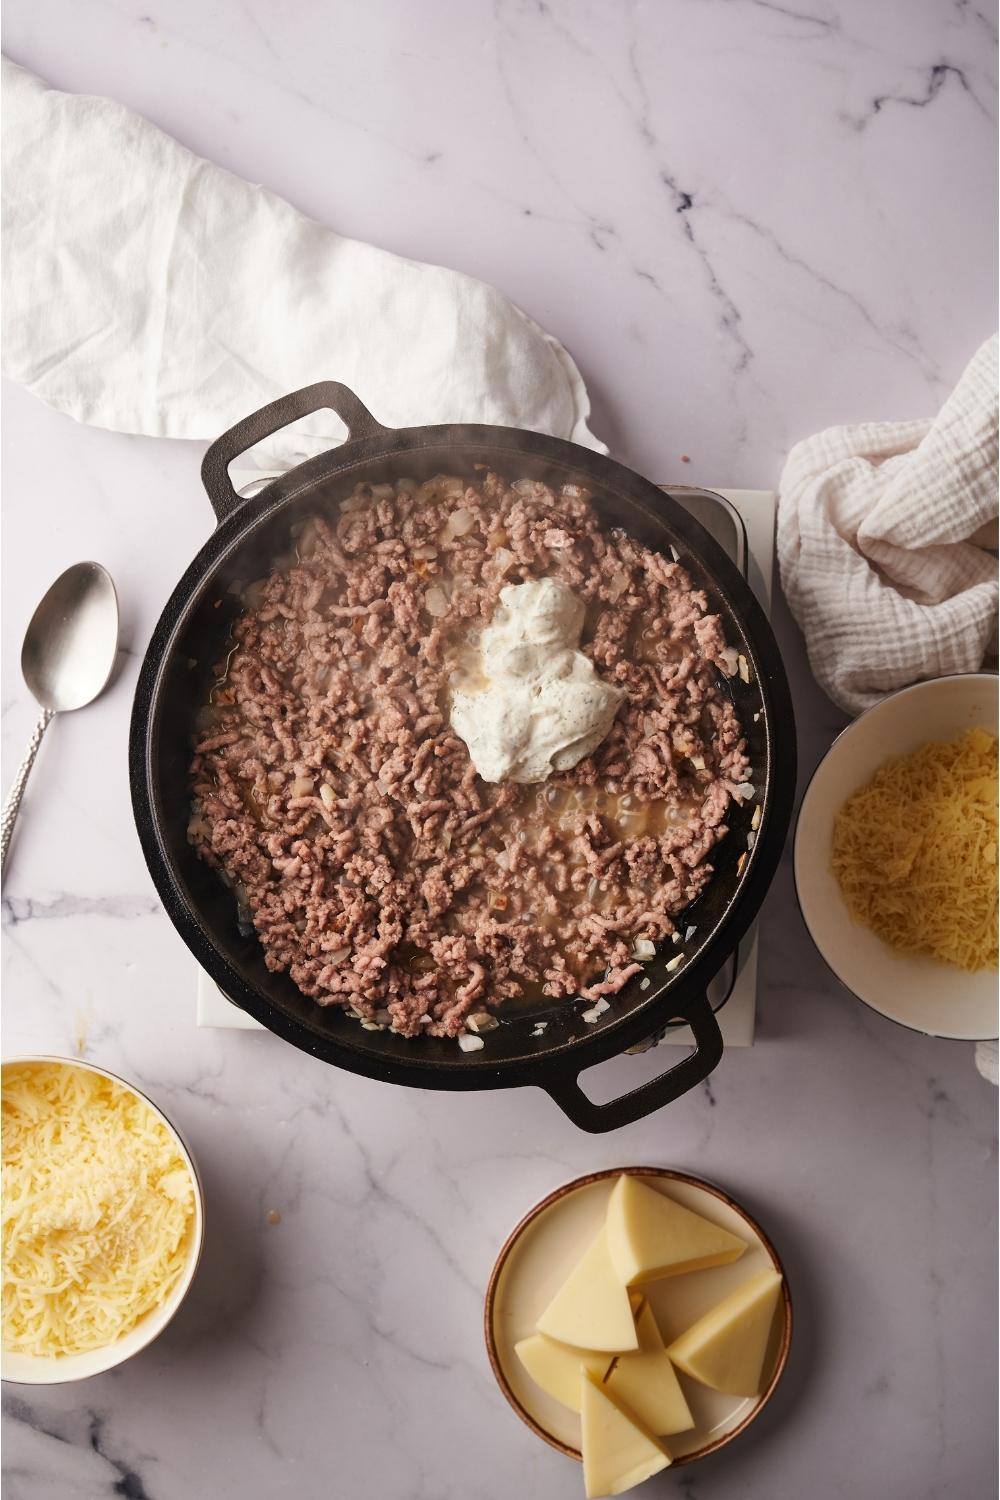 A skillet with cooked ground beef and cream cheese freshly added, the skillet is next to plates of shredded and sliced cheese.